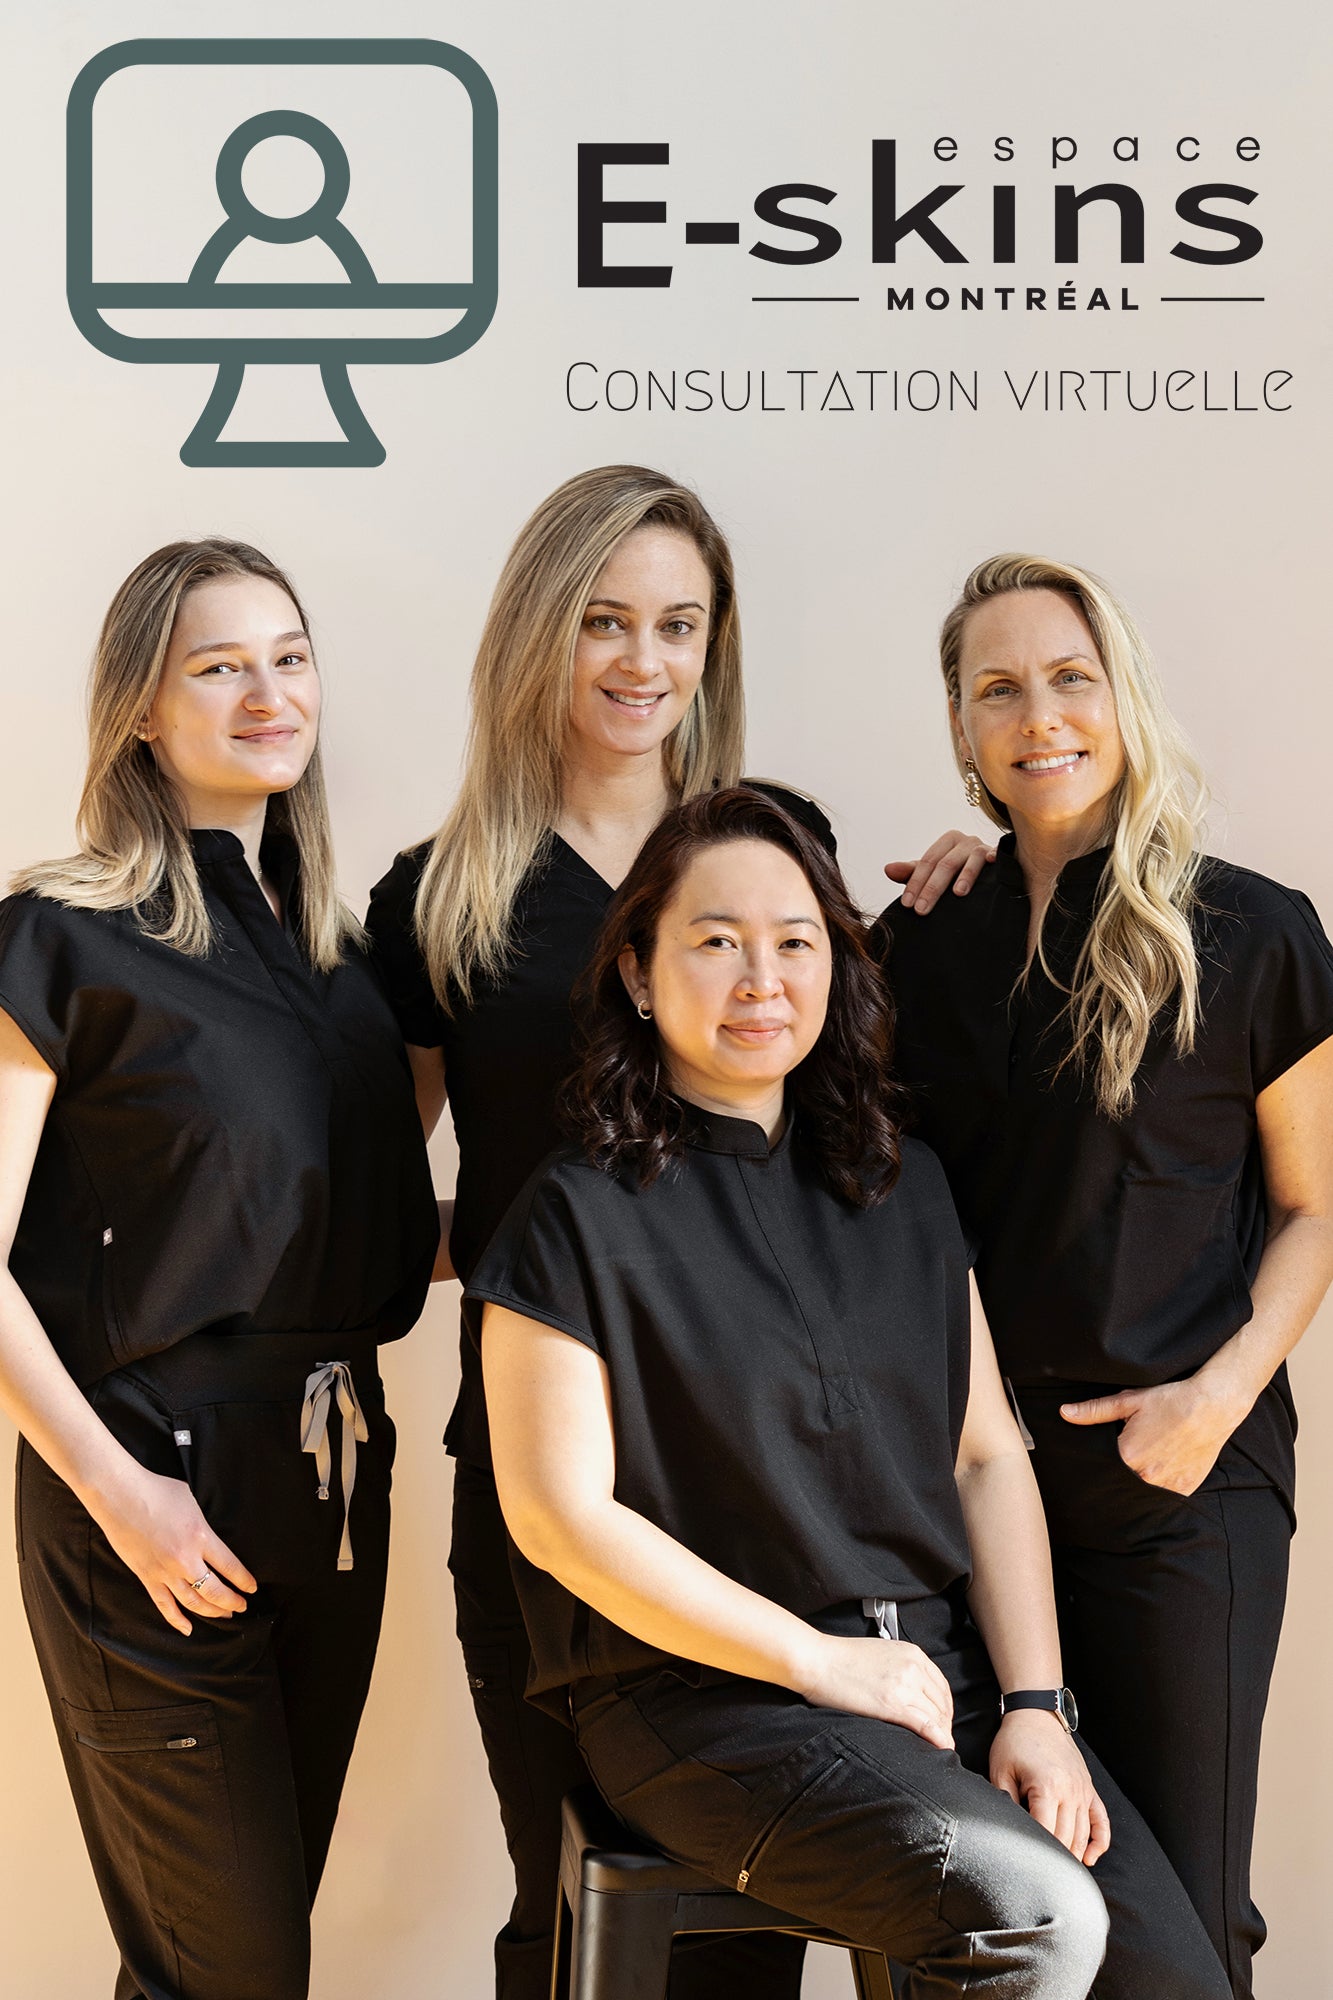 Quickly book a Virtual Consultations